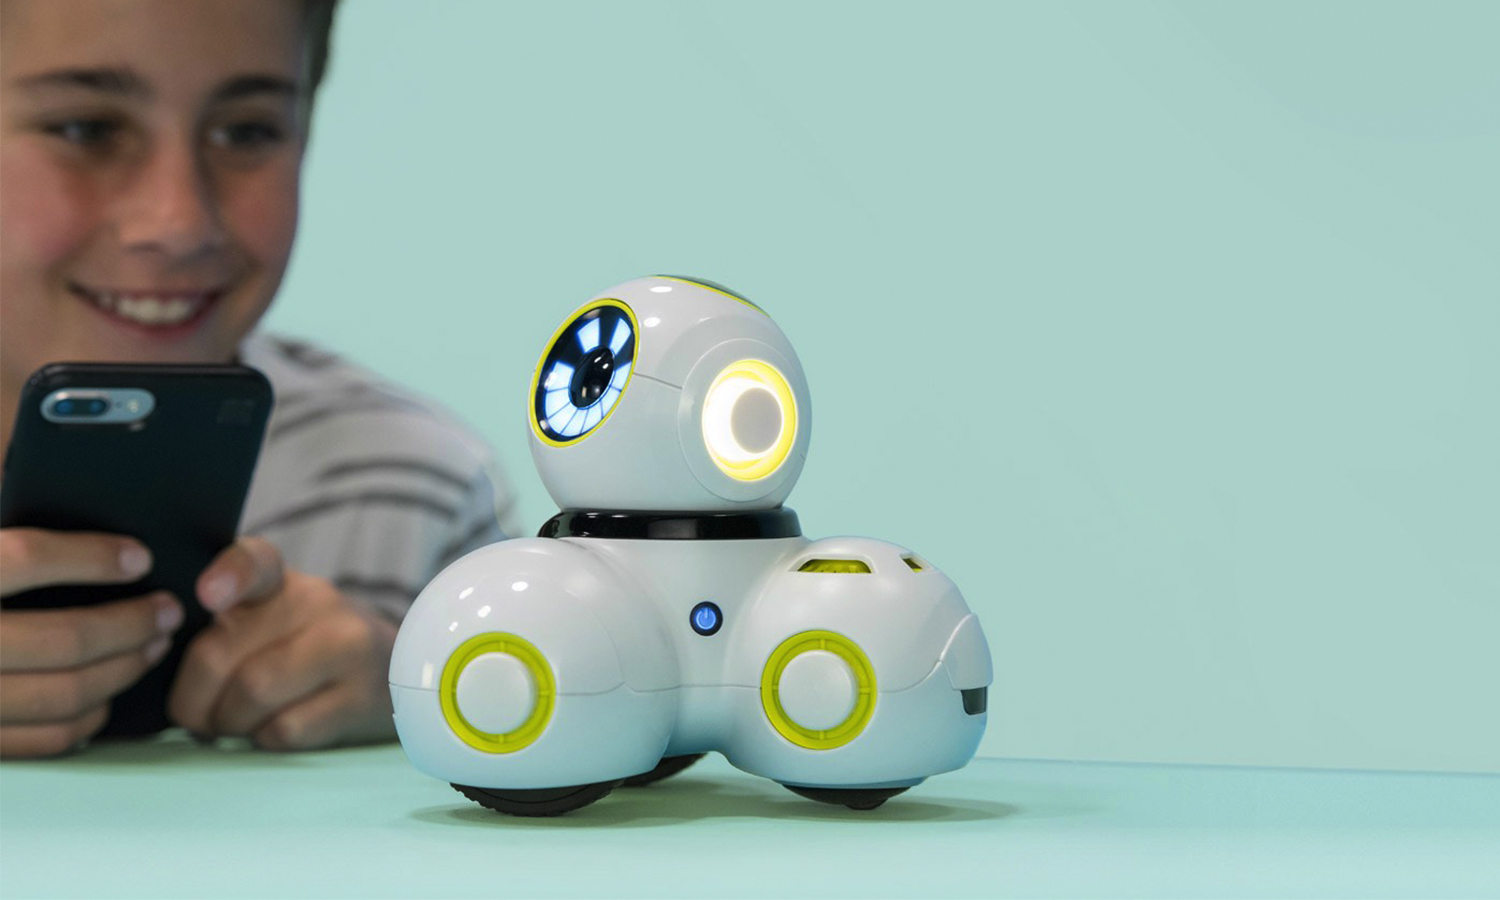 Teq - Clever robots Dash, Dot, and Cue inspire students to